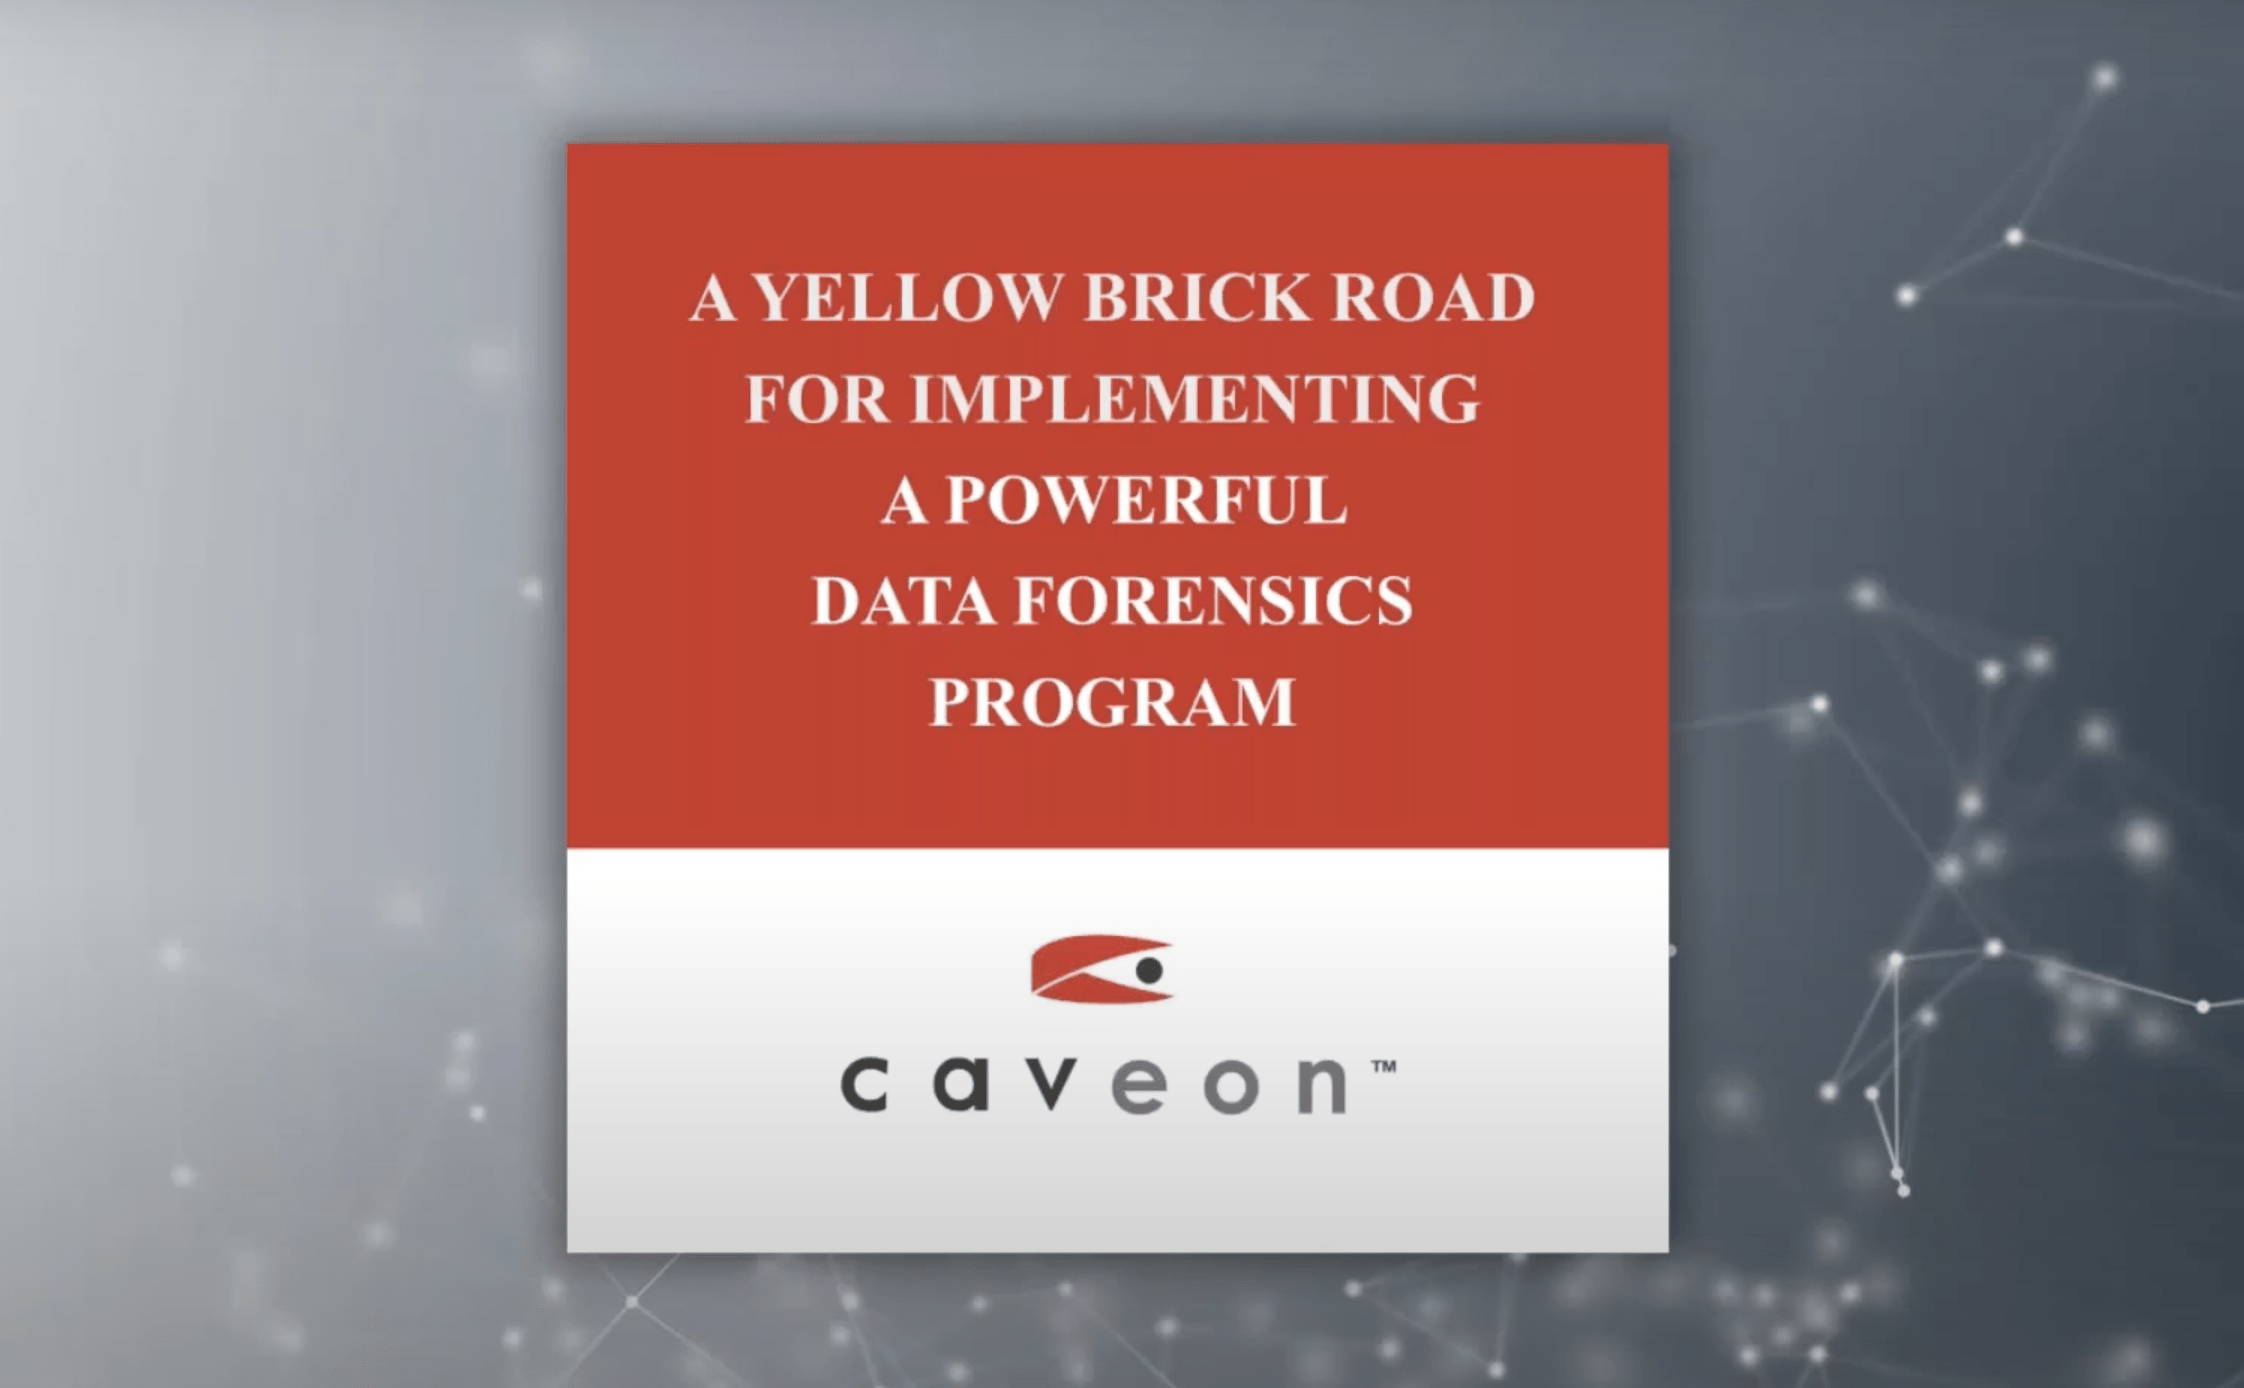 A Yellow Brick Road for Implementing a Powerful Data Forensics Program